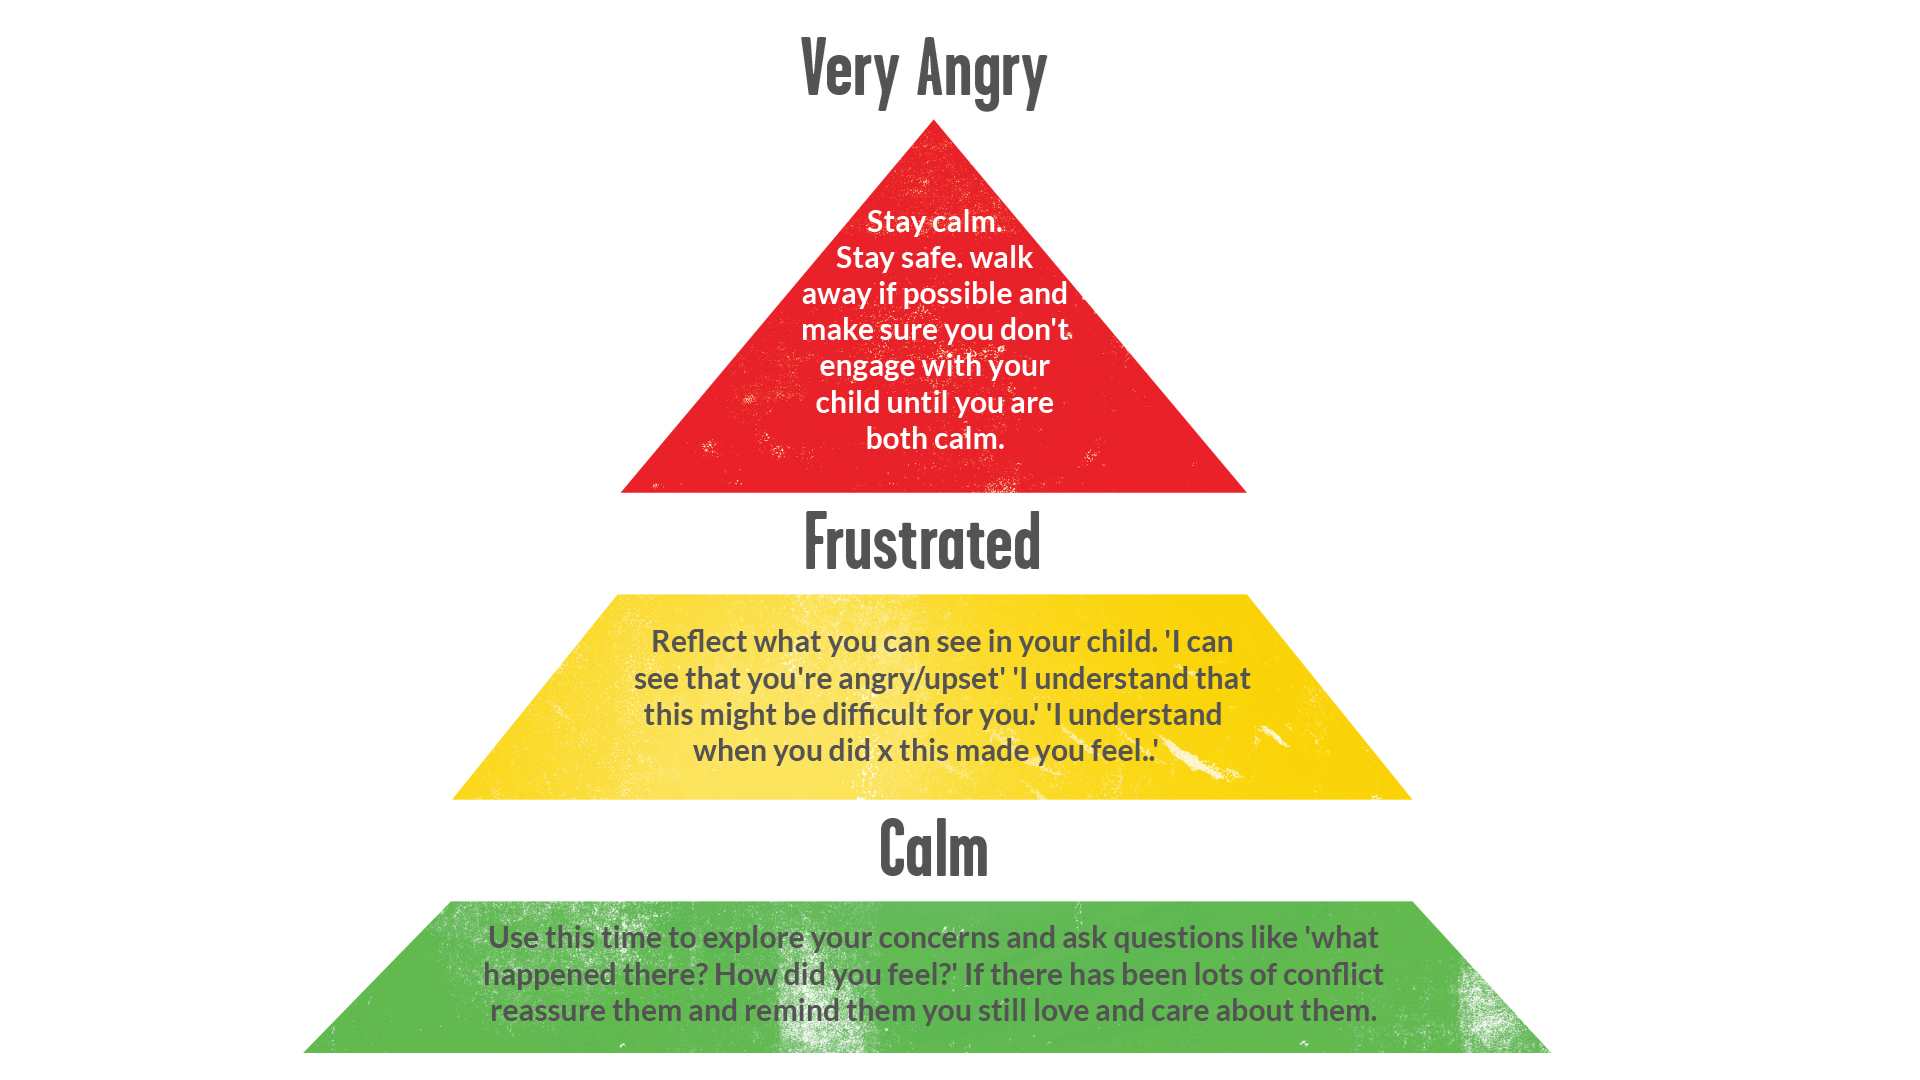 An image of our 'When Emotions Explode' poster. It shows a pyramid divided into 3 sections with the sub headings 'Very Angry', Frustrated', and 'Calm'.